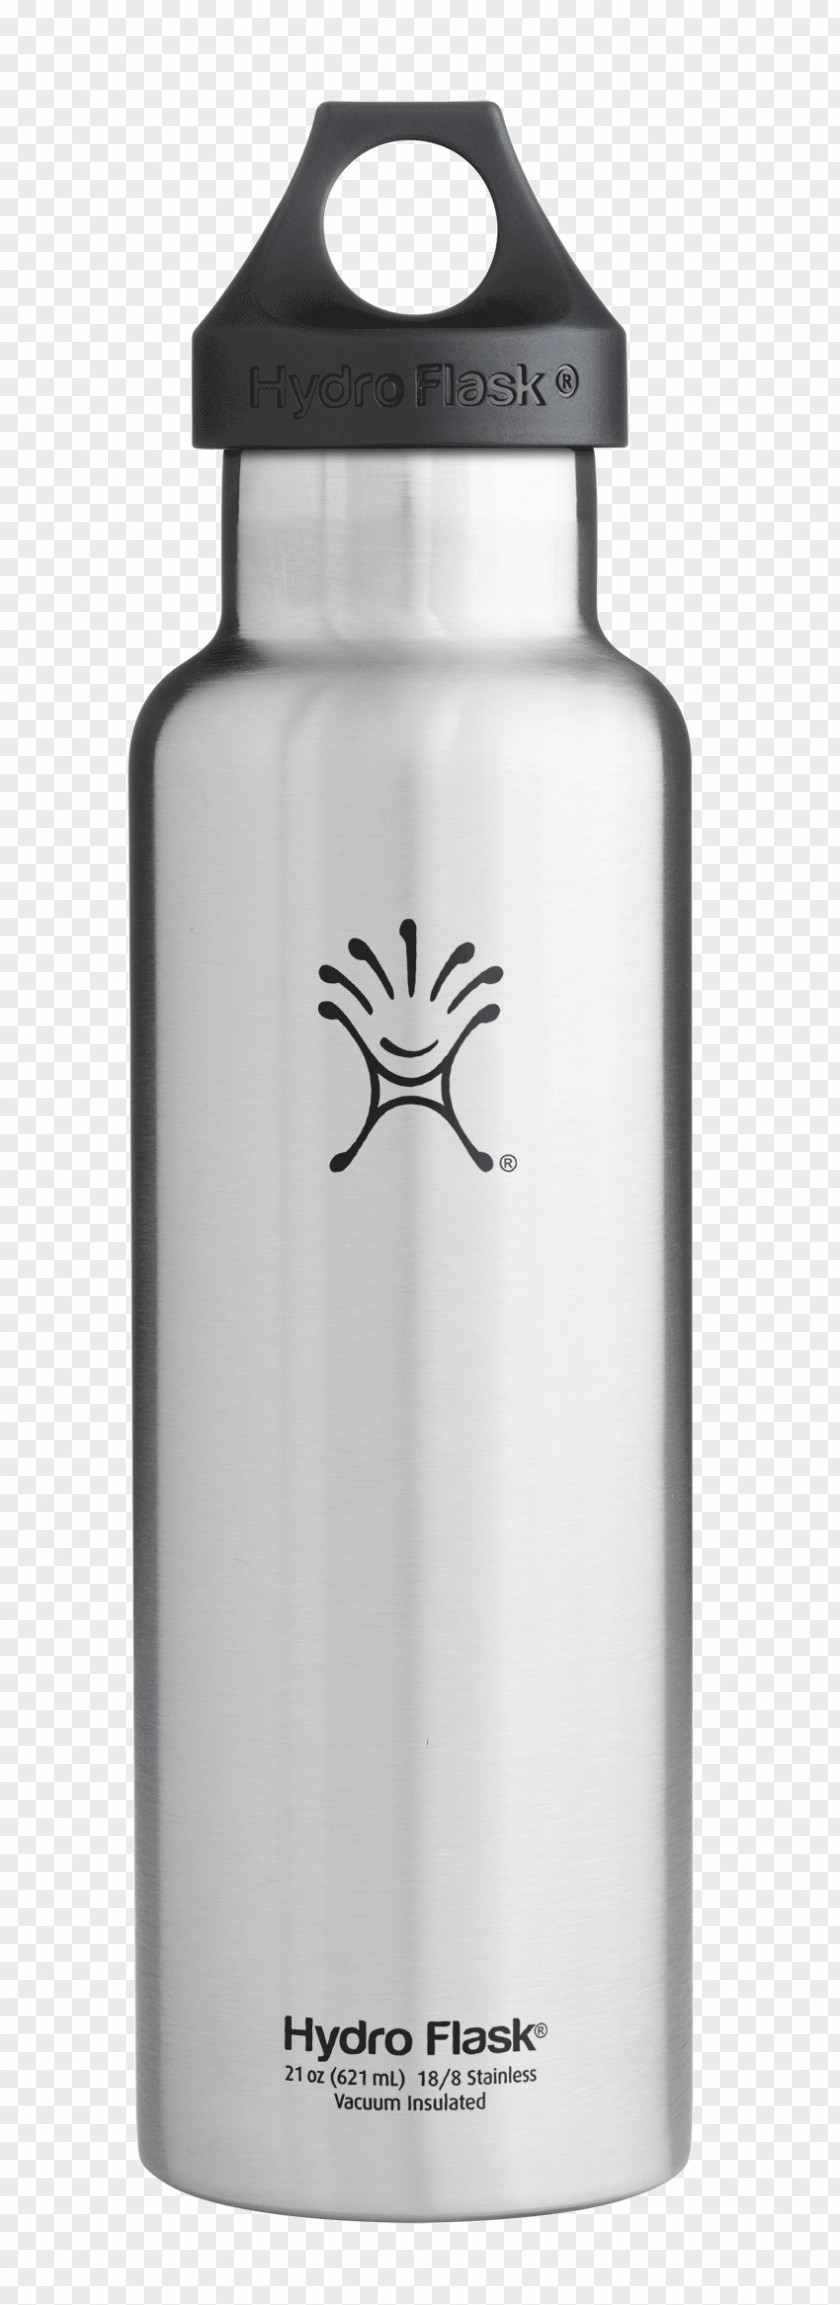 Bottle Water Bottles Thermal Insulation Vacuum Insulated Panel Hydro Flask PNG